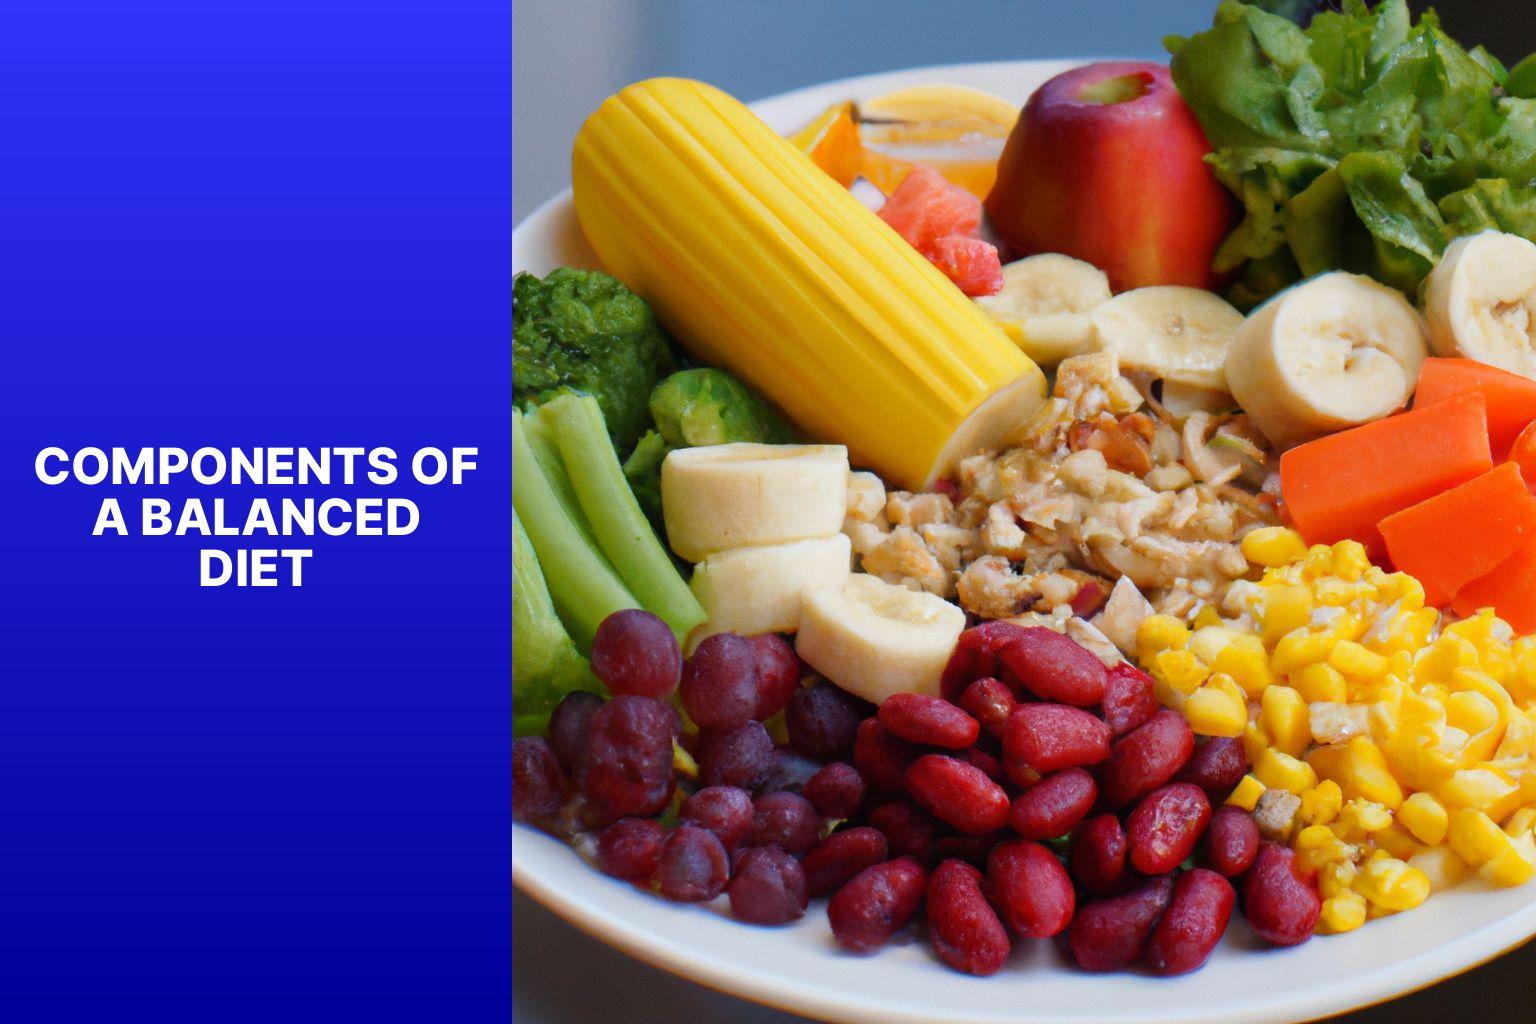 Components of a Balanced Diet - The Importance of a Balanced Diet for a Healthy Lifestyle 